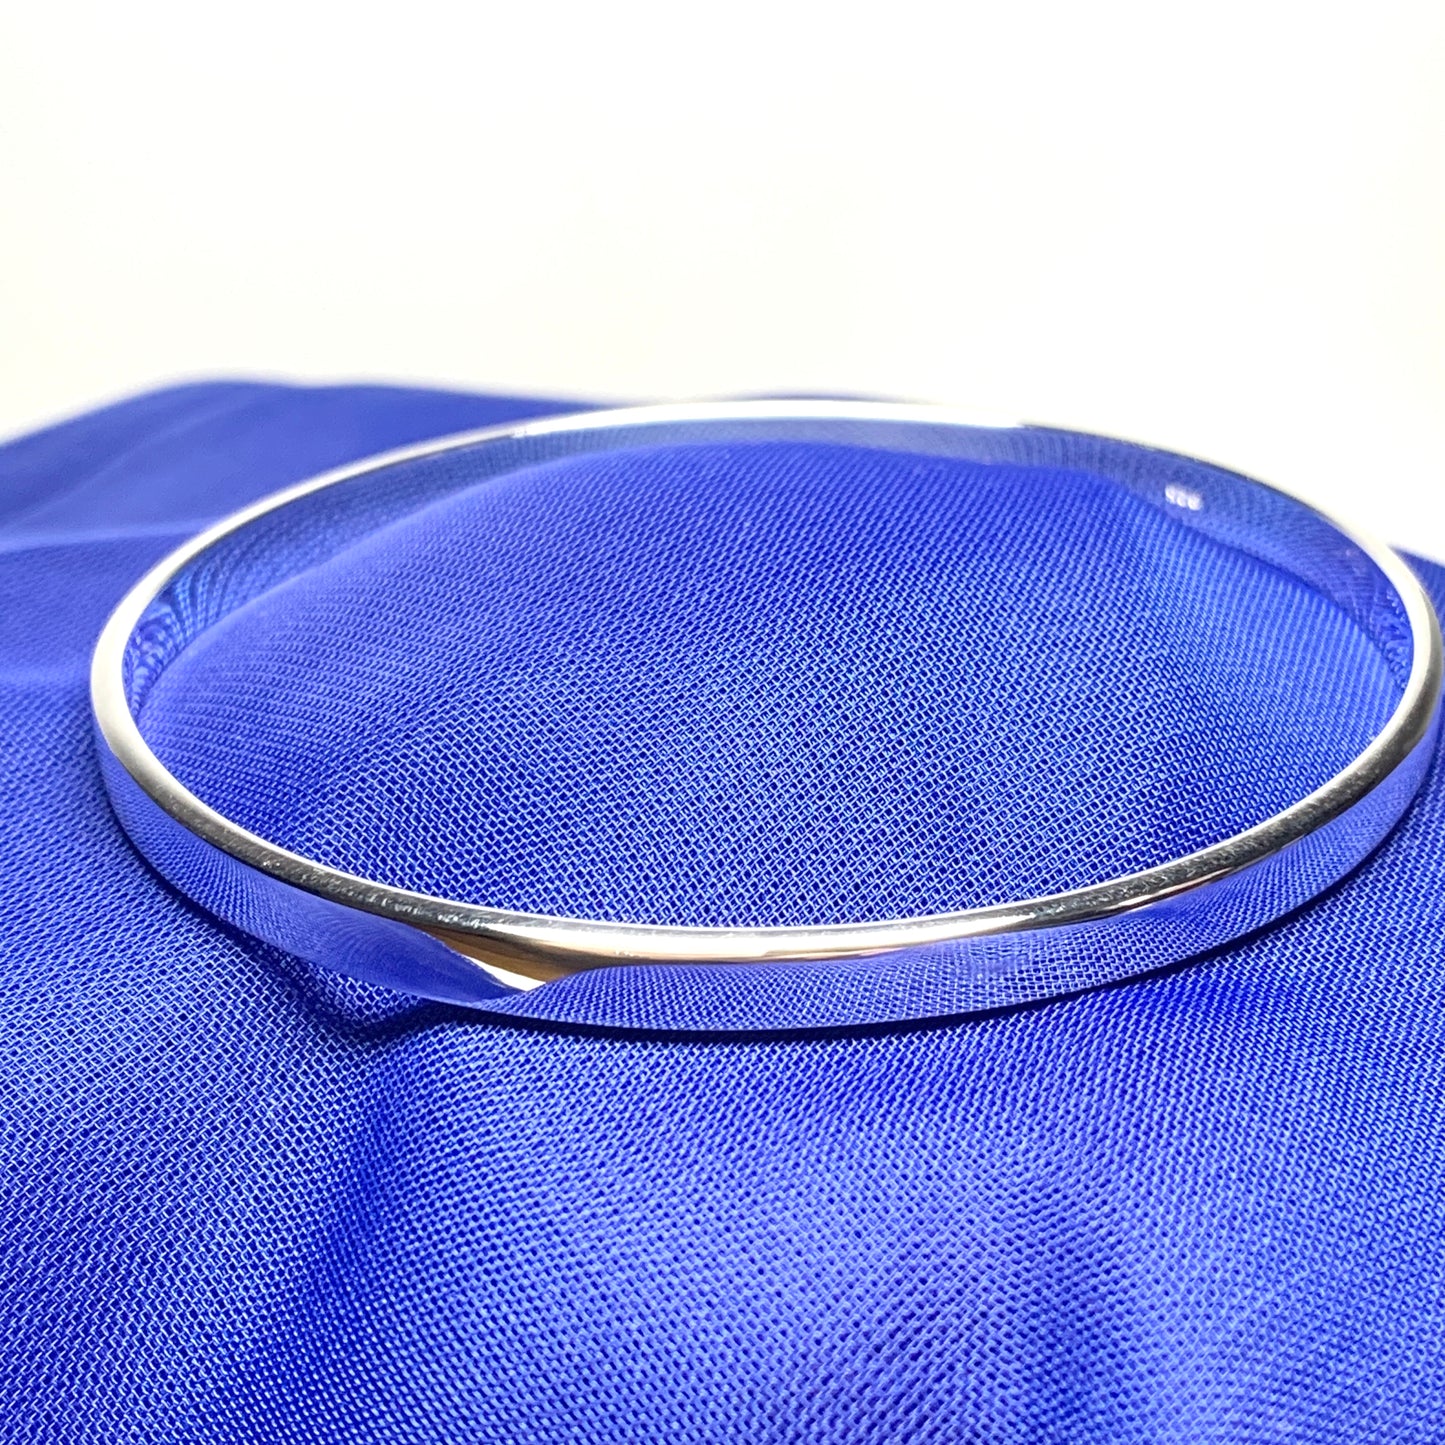 Ladies sterling silver solid oval plain polished bangle